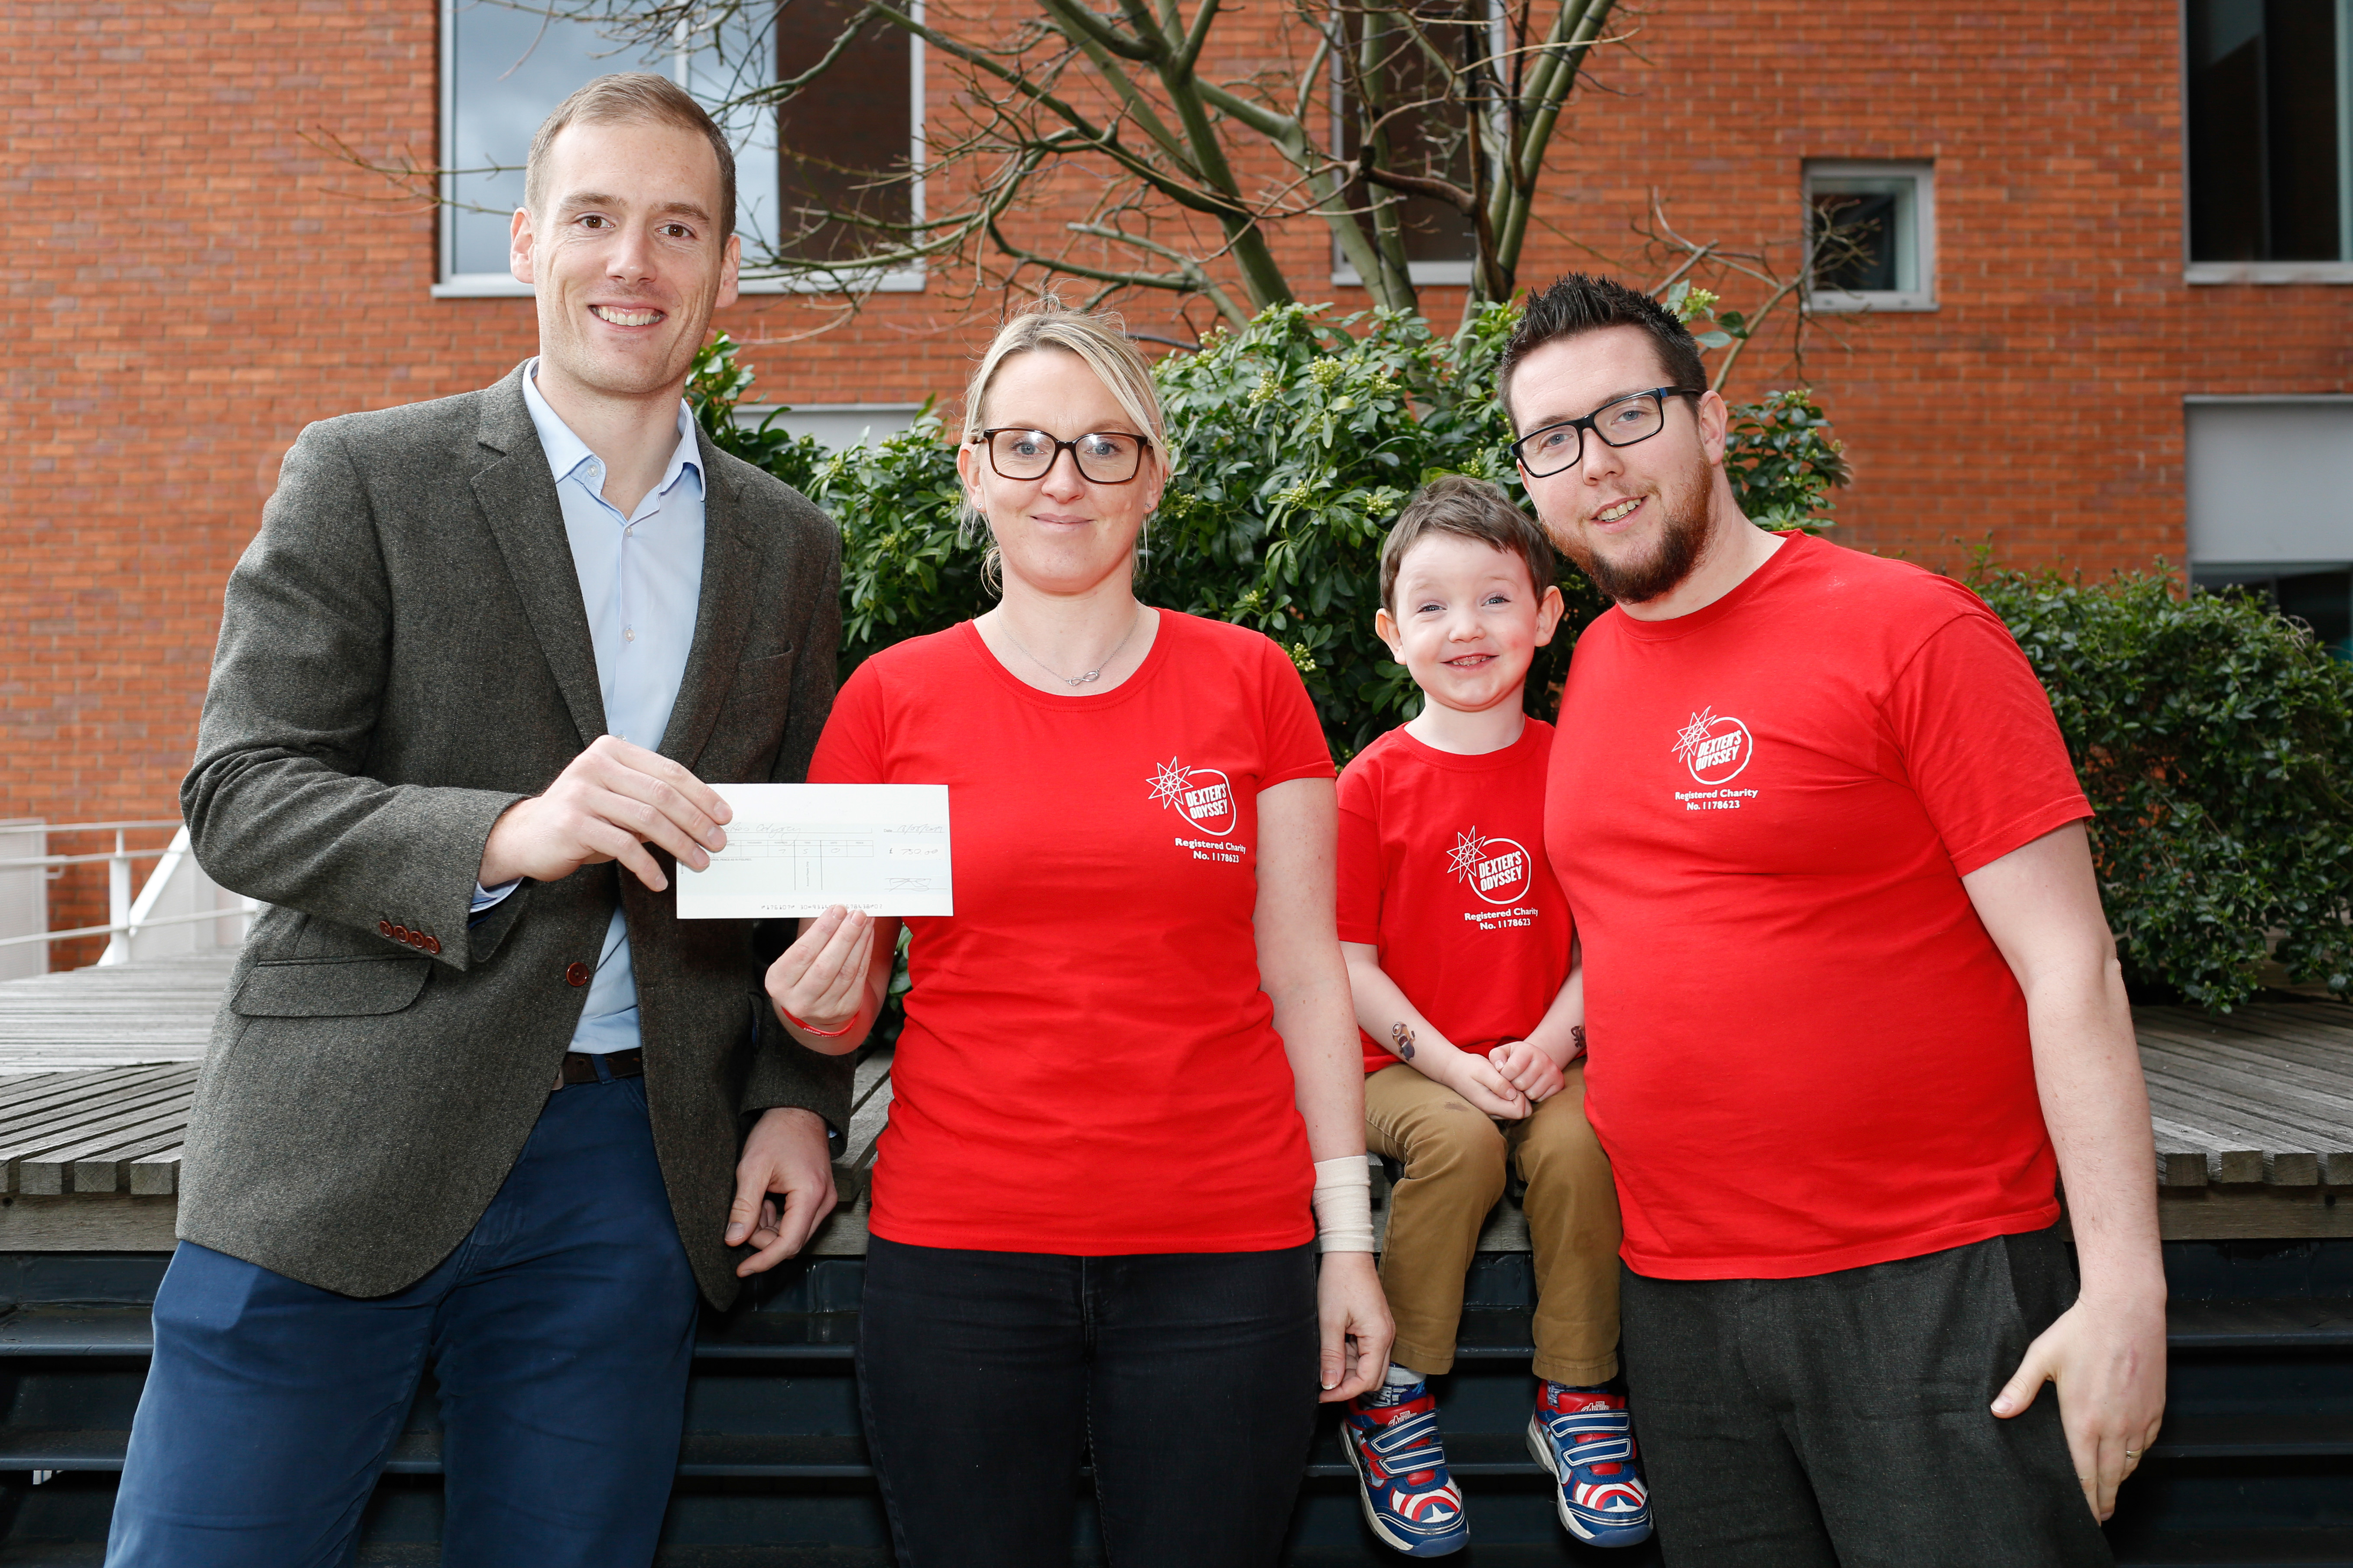 Bristol children’s cancer charity first to benefit from law firm Ashfords’ foundation